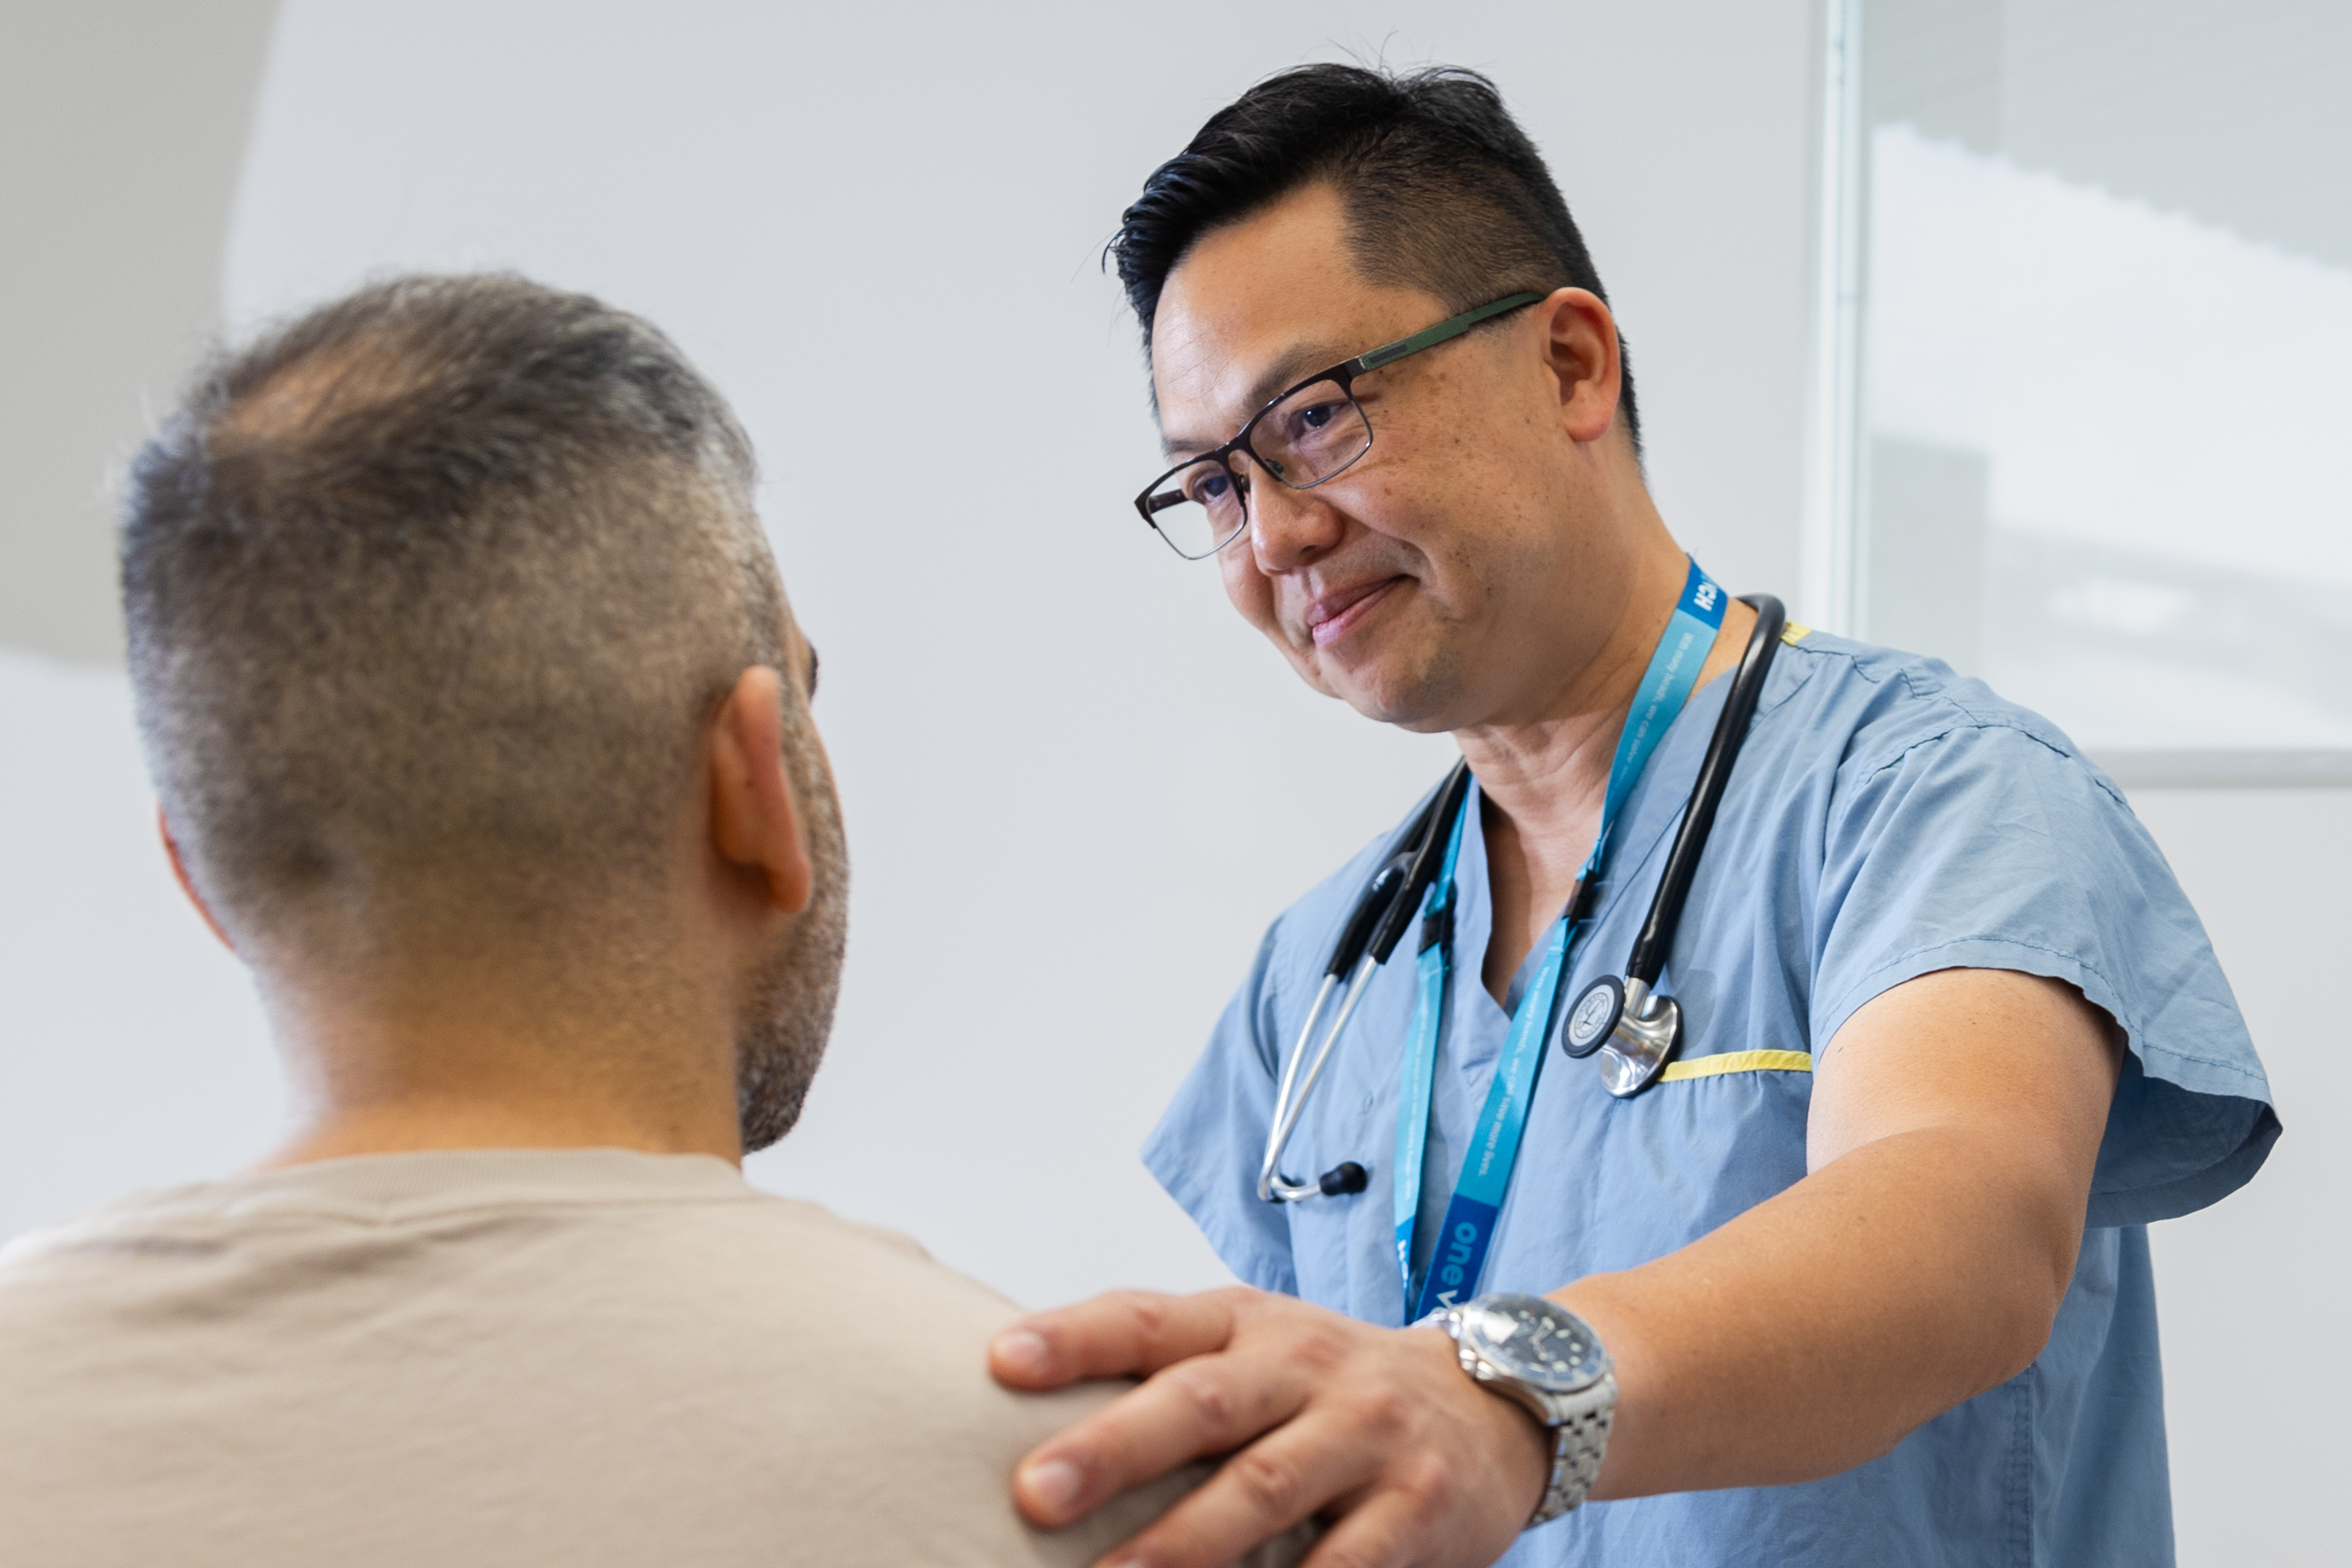 Physician has his hand on patient shoulder 